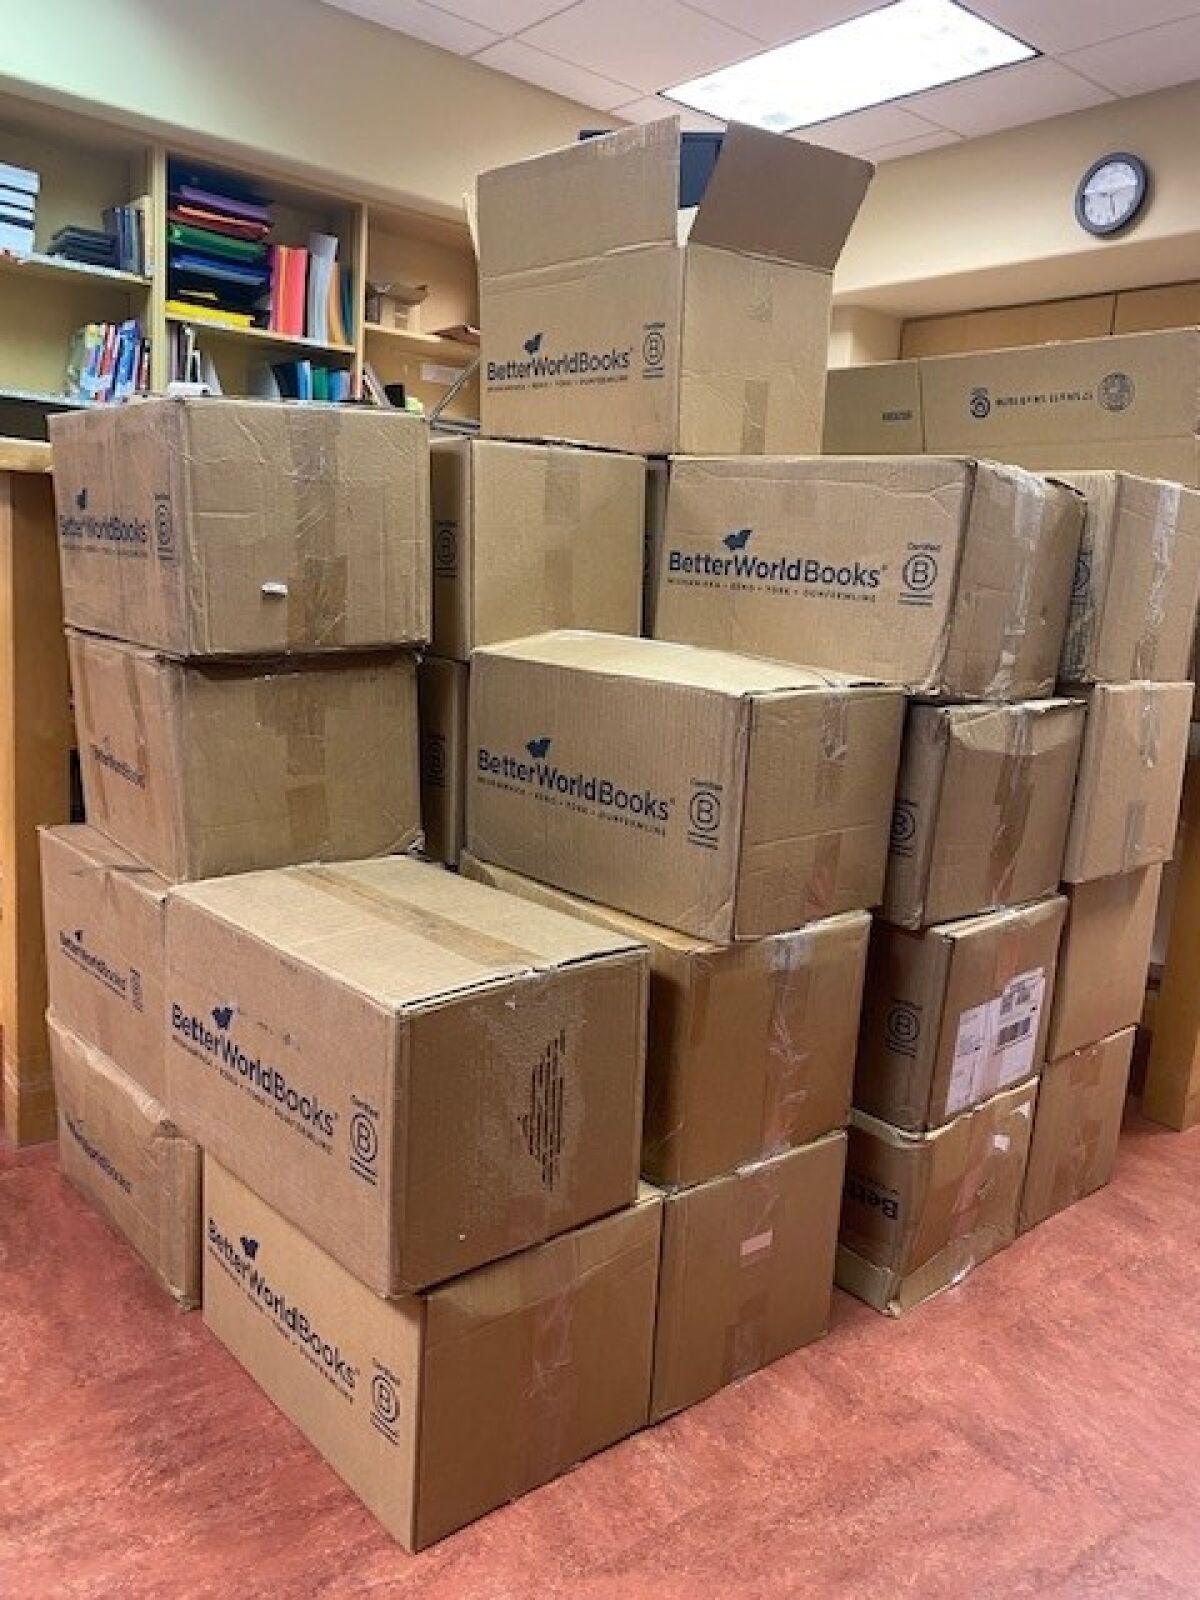 Boxes full of books withdrawn from the La Jolla/Riford Library collection await shipment to Better World Books.